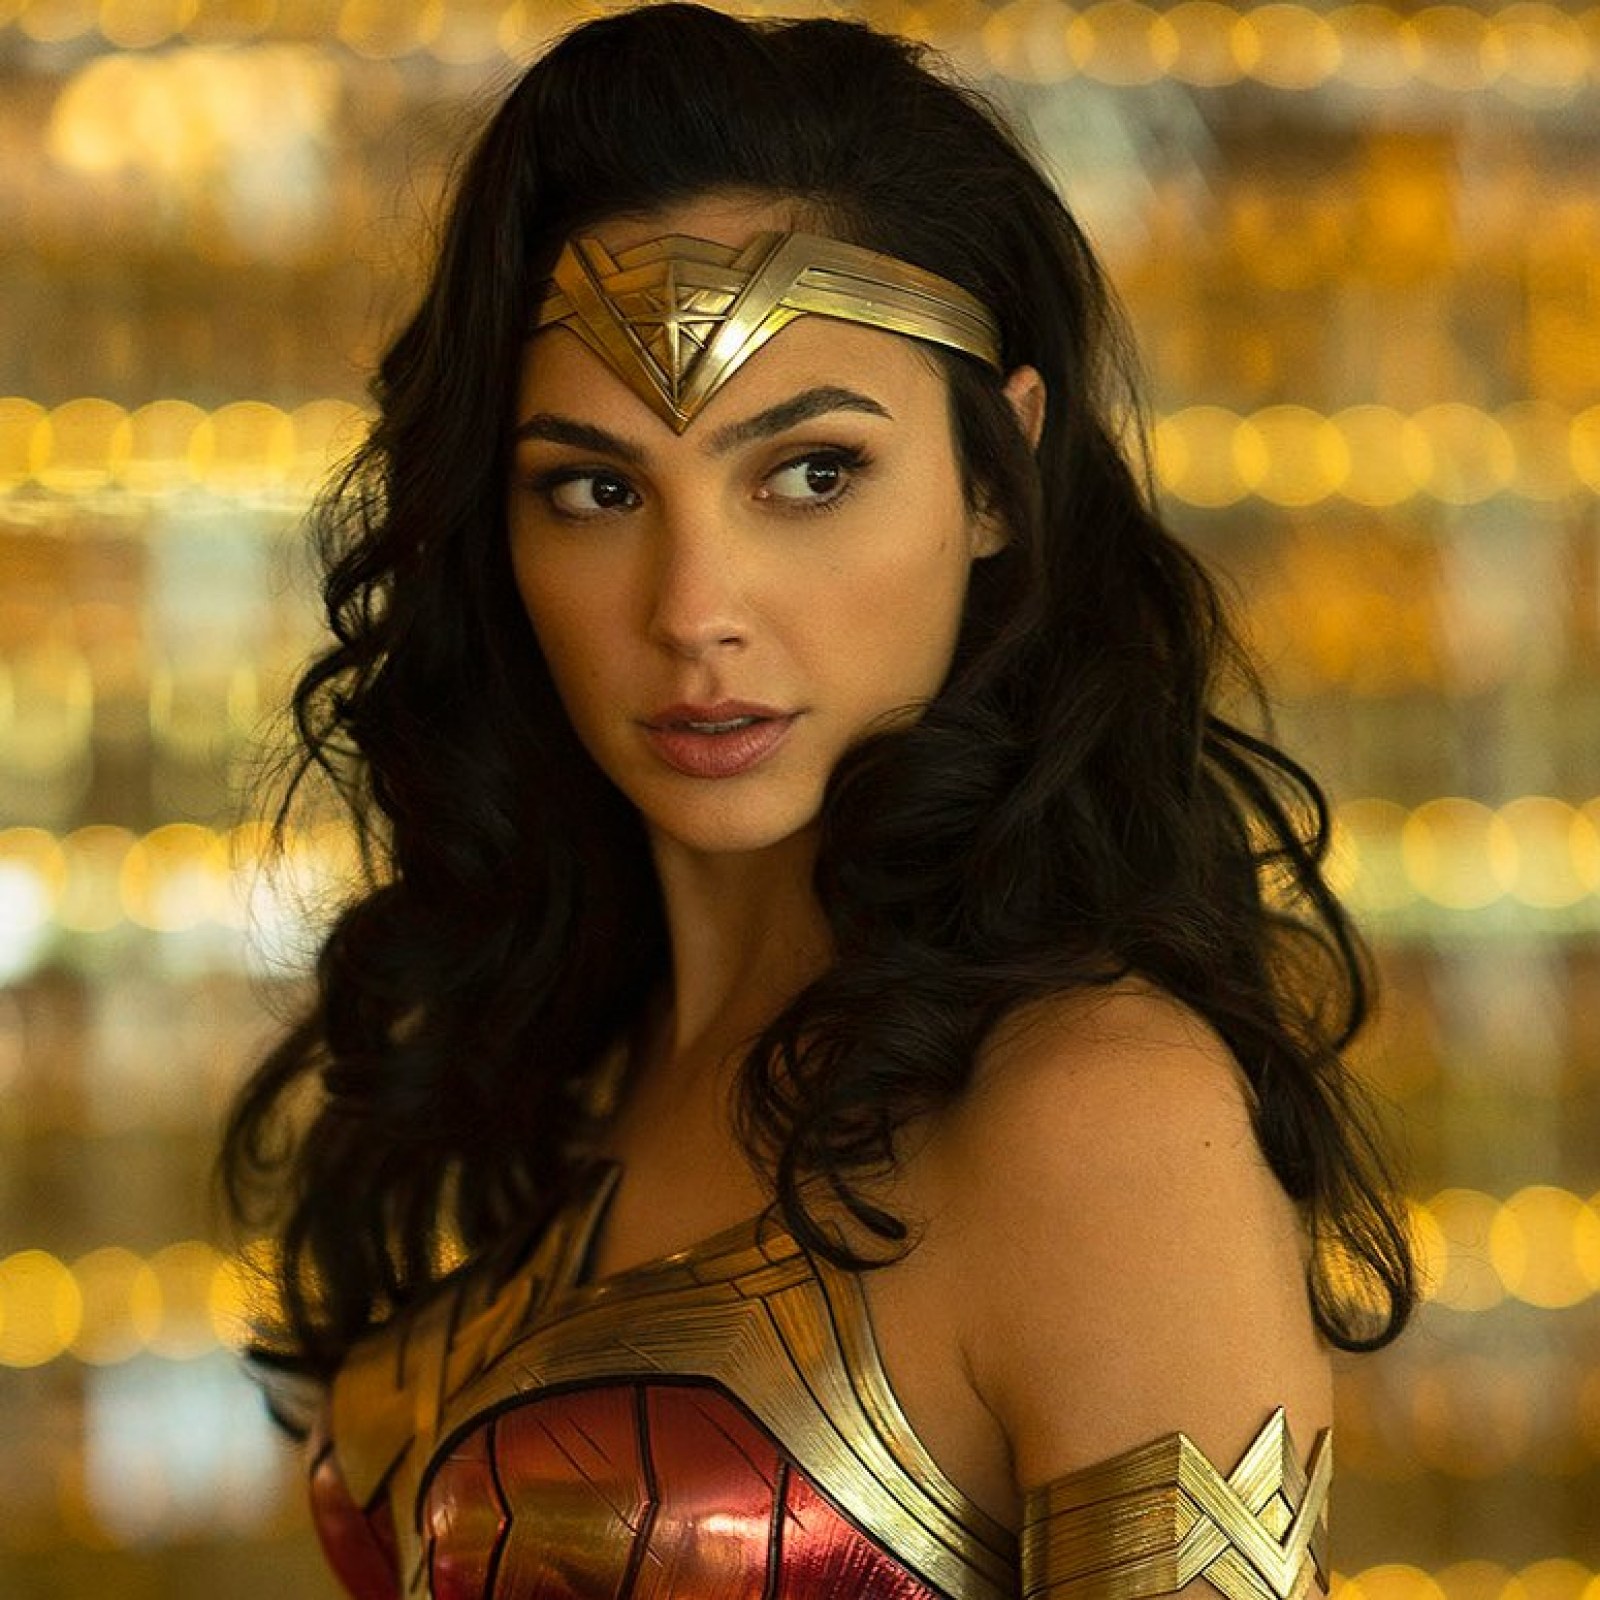 Make an image of the character wonder woman, who is played by